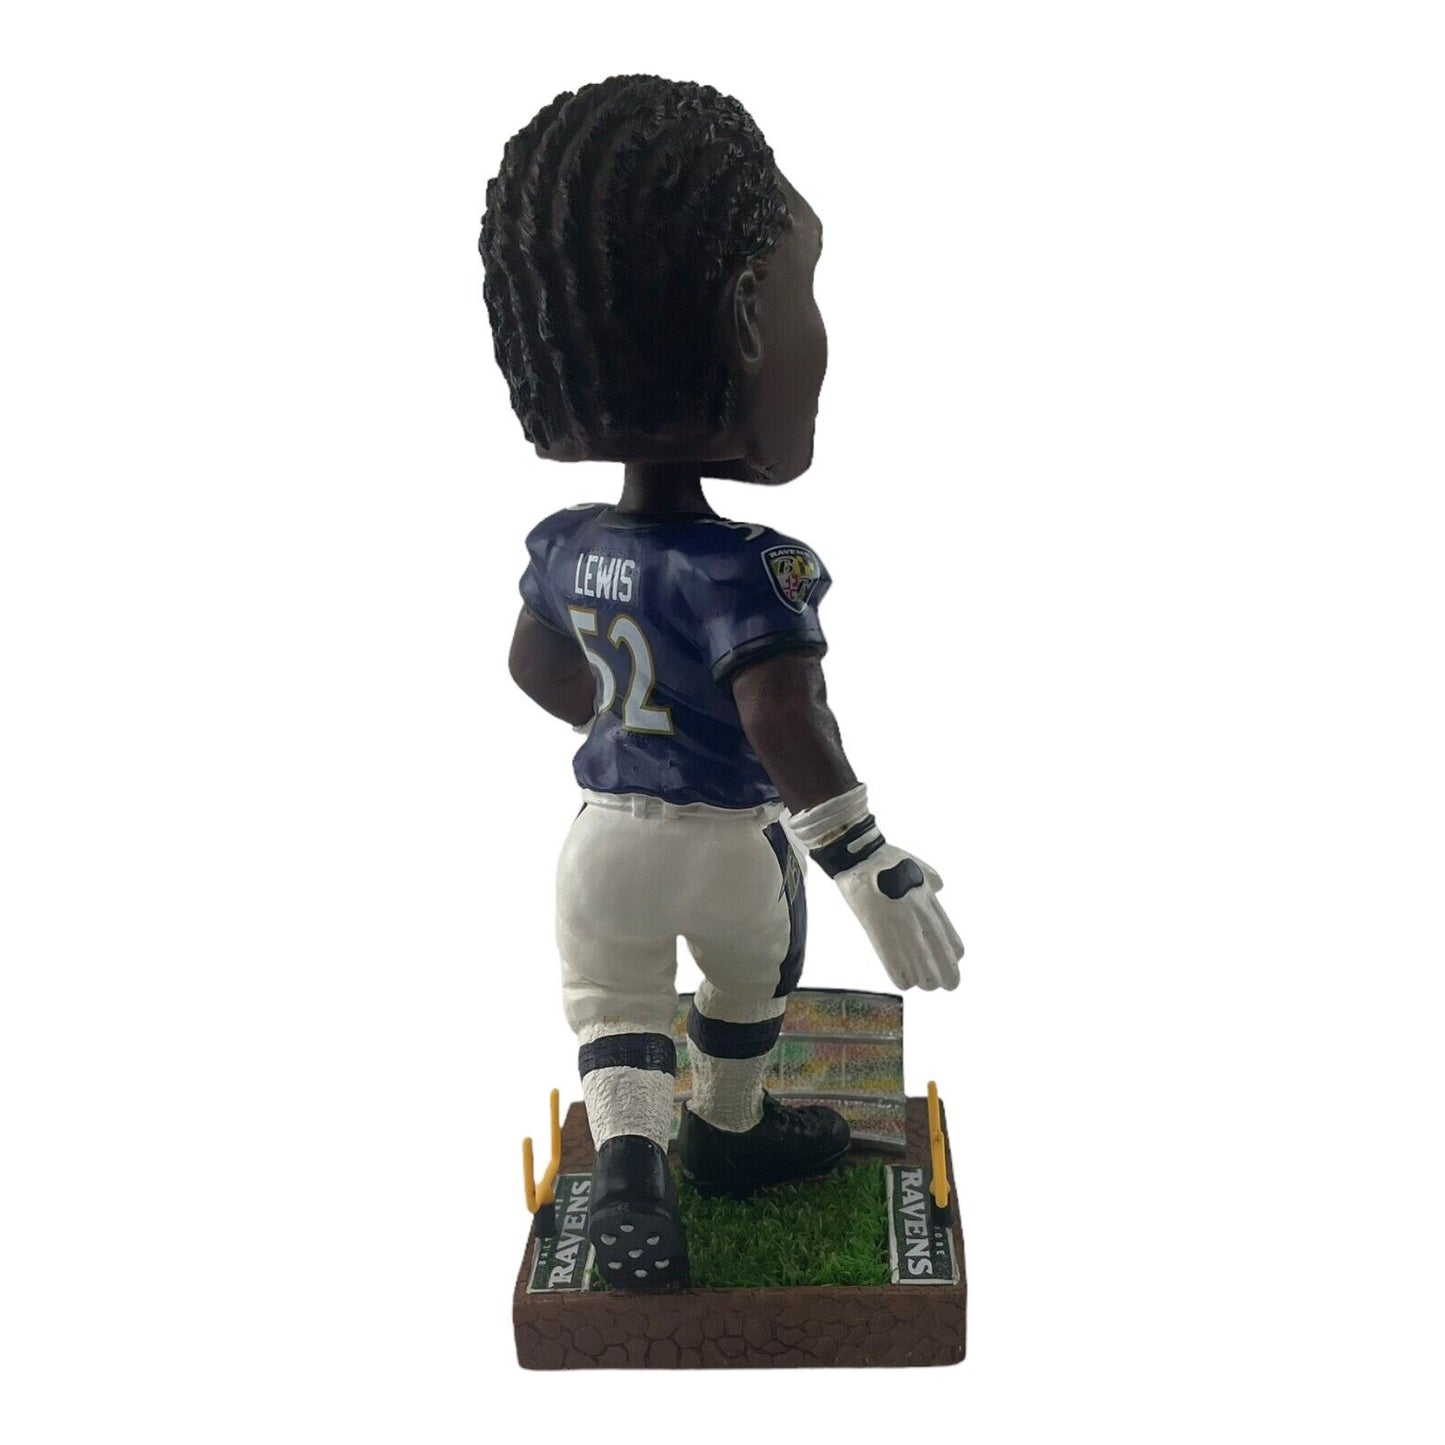 NFL Legends of the Field Ray Lewis 7 Inch Bobble Head Baltimore Ravens